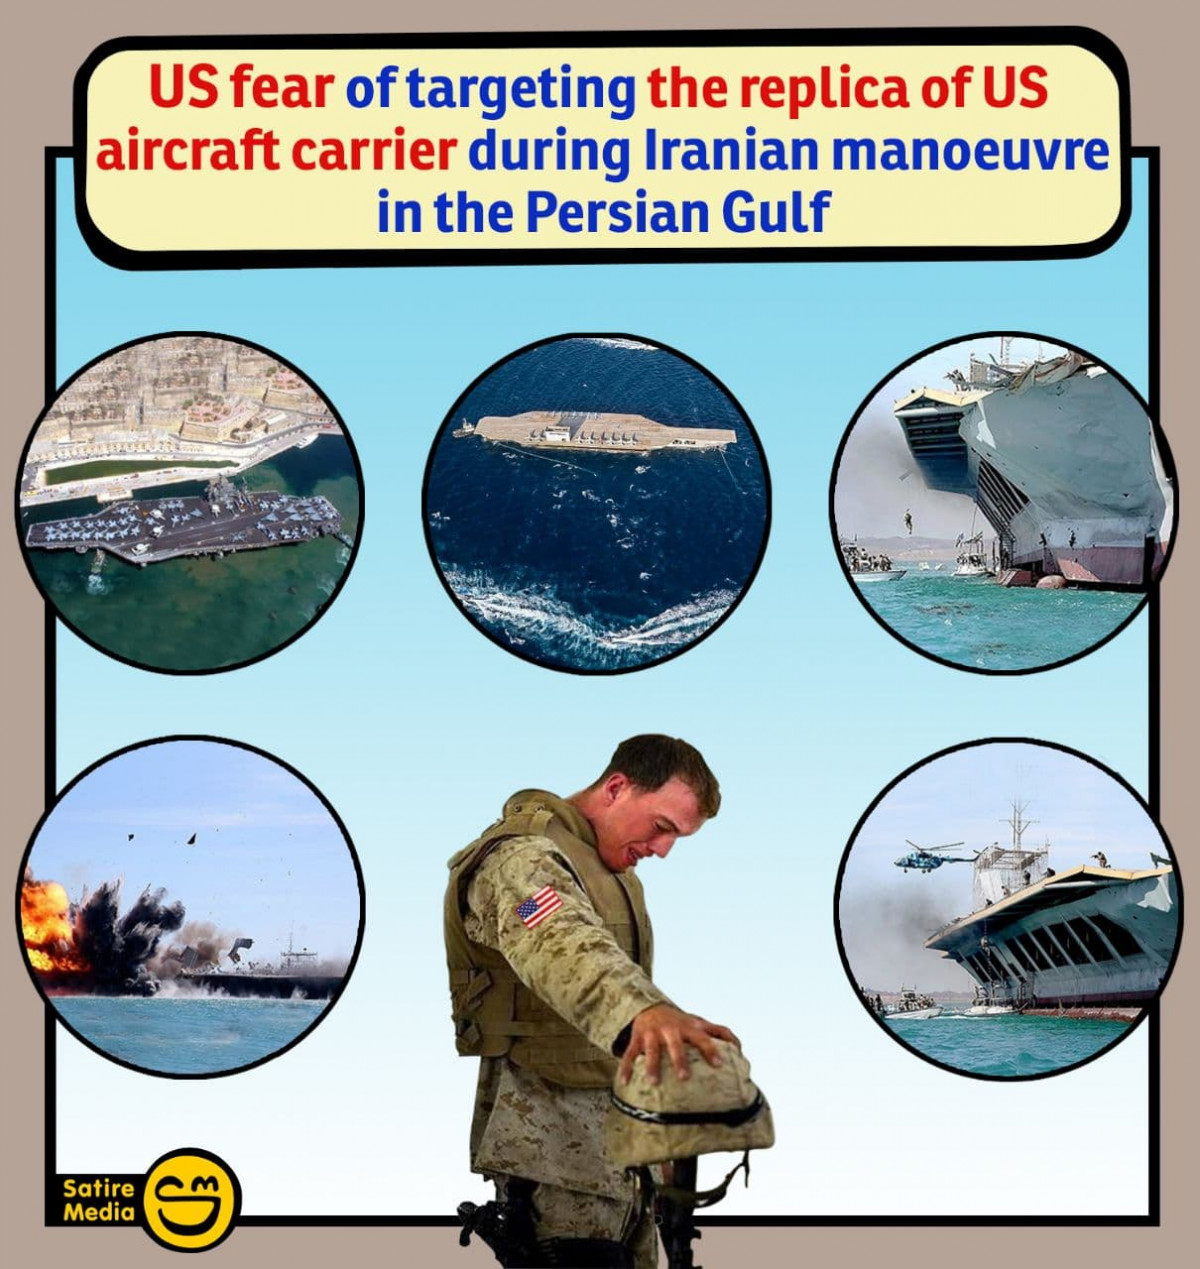 US fear of targeting the replica of US aircraft carrier during Iranian manoeuvre in the Persian Gulf